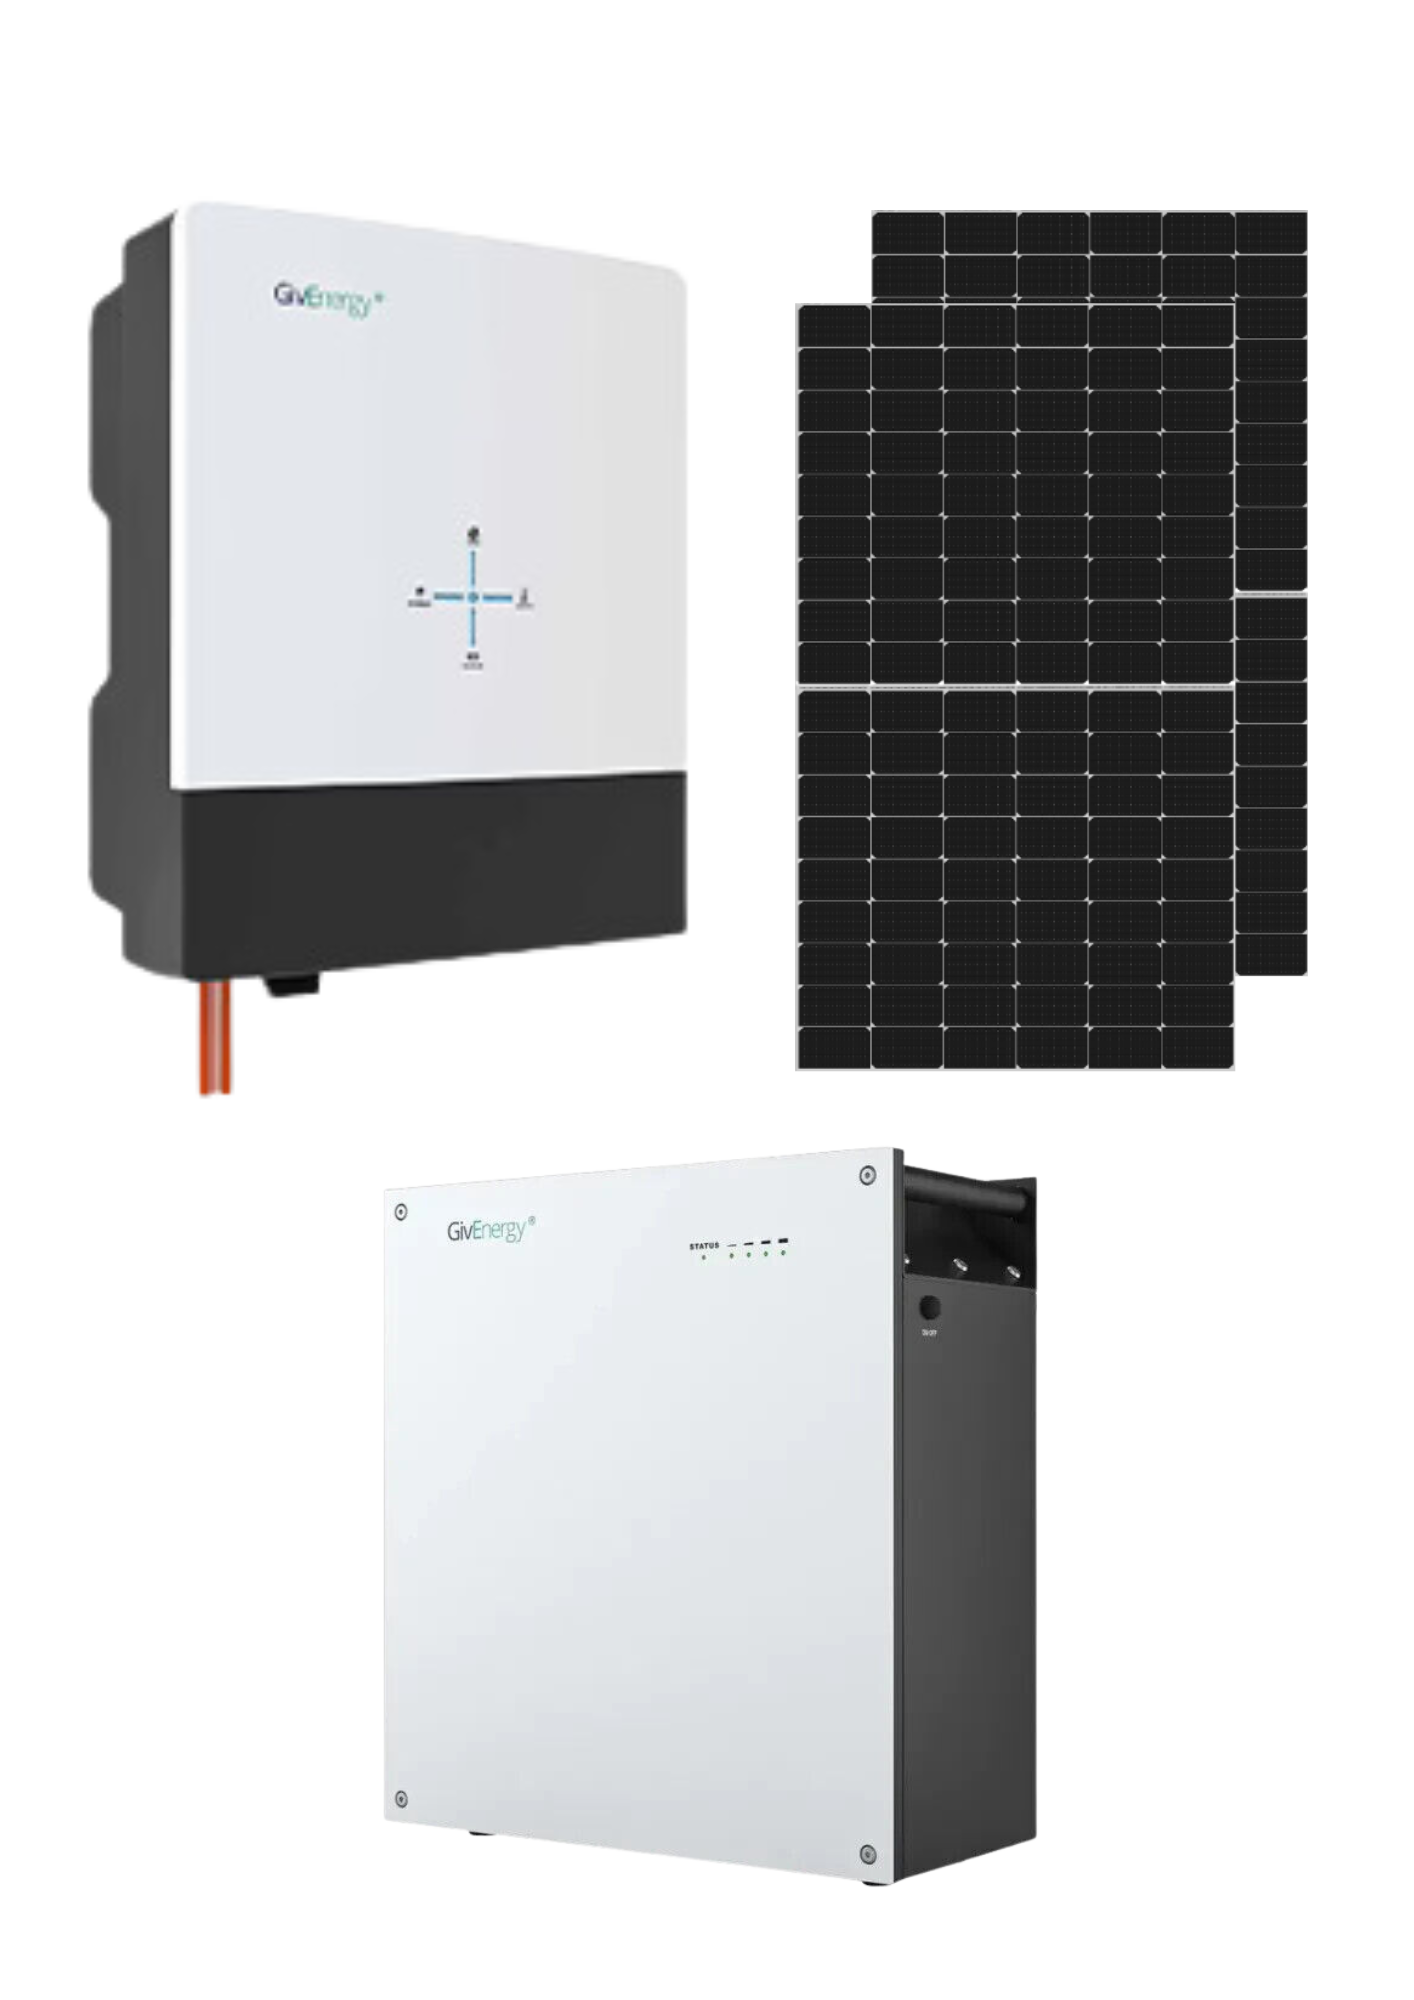 445W Panels Tiger Neo N-type Panels, 5.2kWh GivEnergy Battery & 3.6kWh GivEnergy Inverter